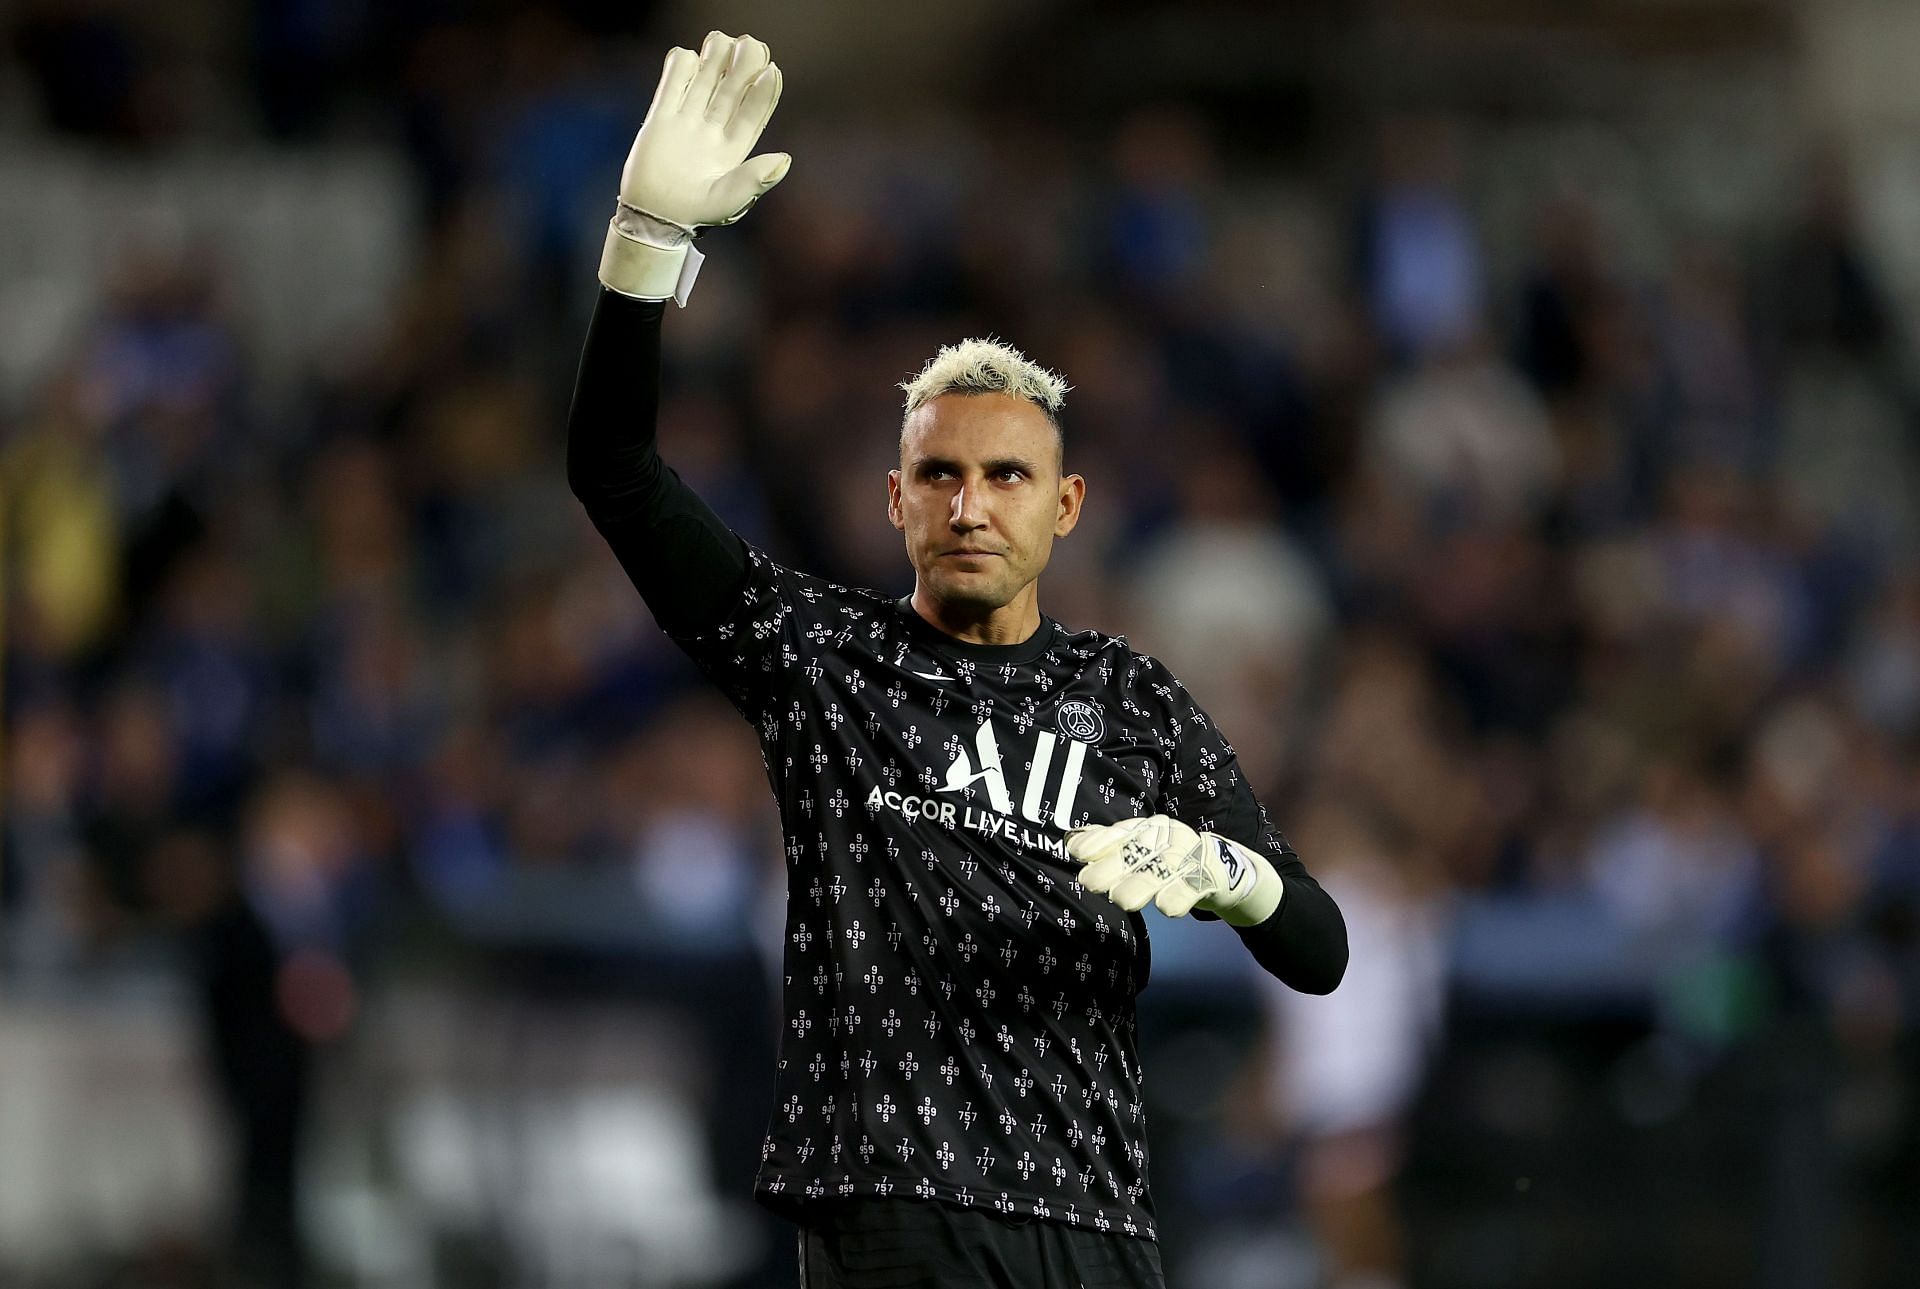 Newcastle United failed in an attempt to sign Keylor Navas.